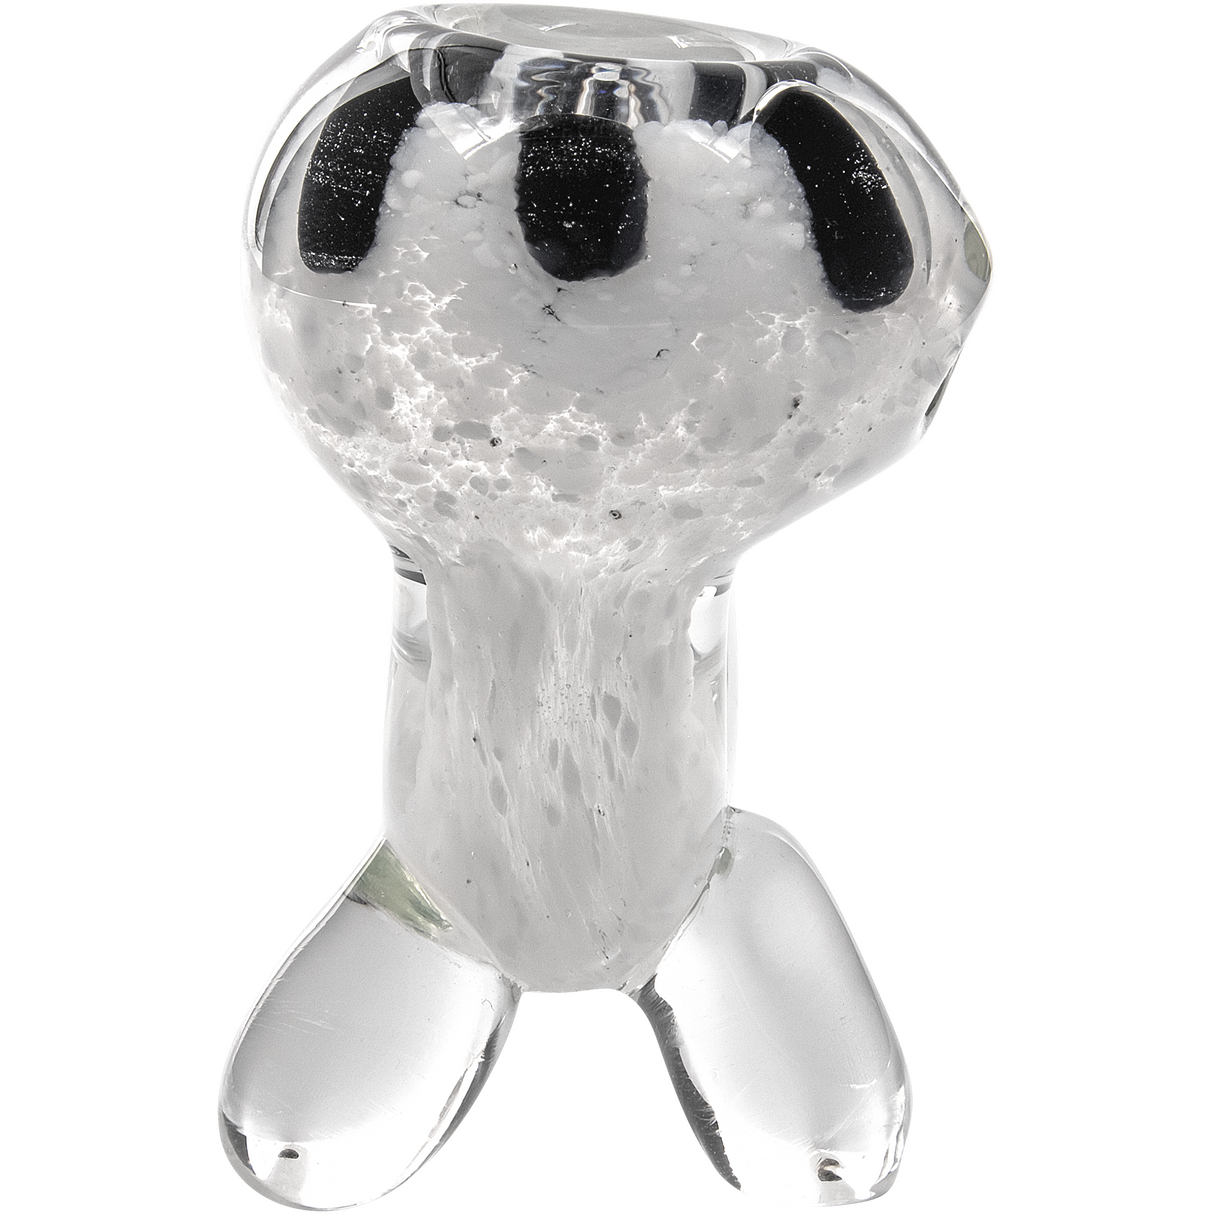 LA Pipes White Fritted Sherlock Hand Pipe with Black Daisy Bowl, Borosilicate Glass, Front View